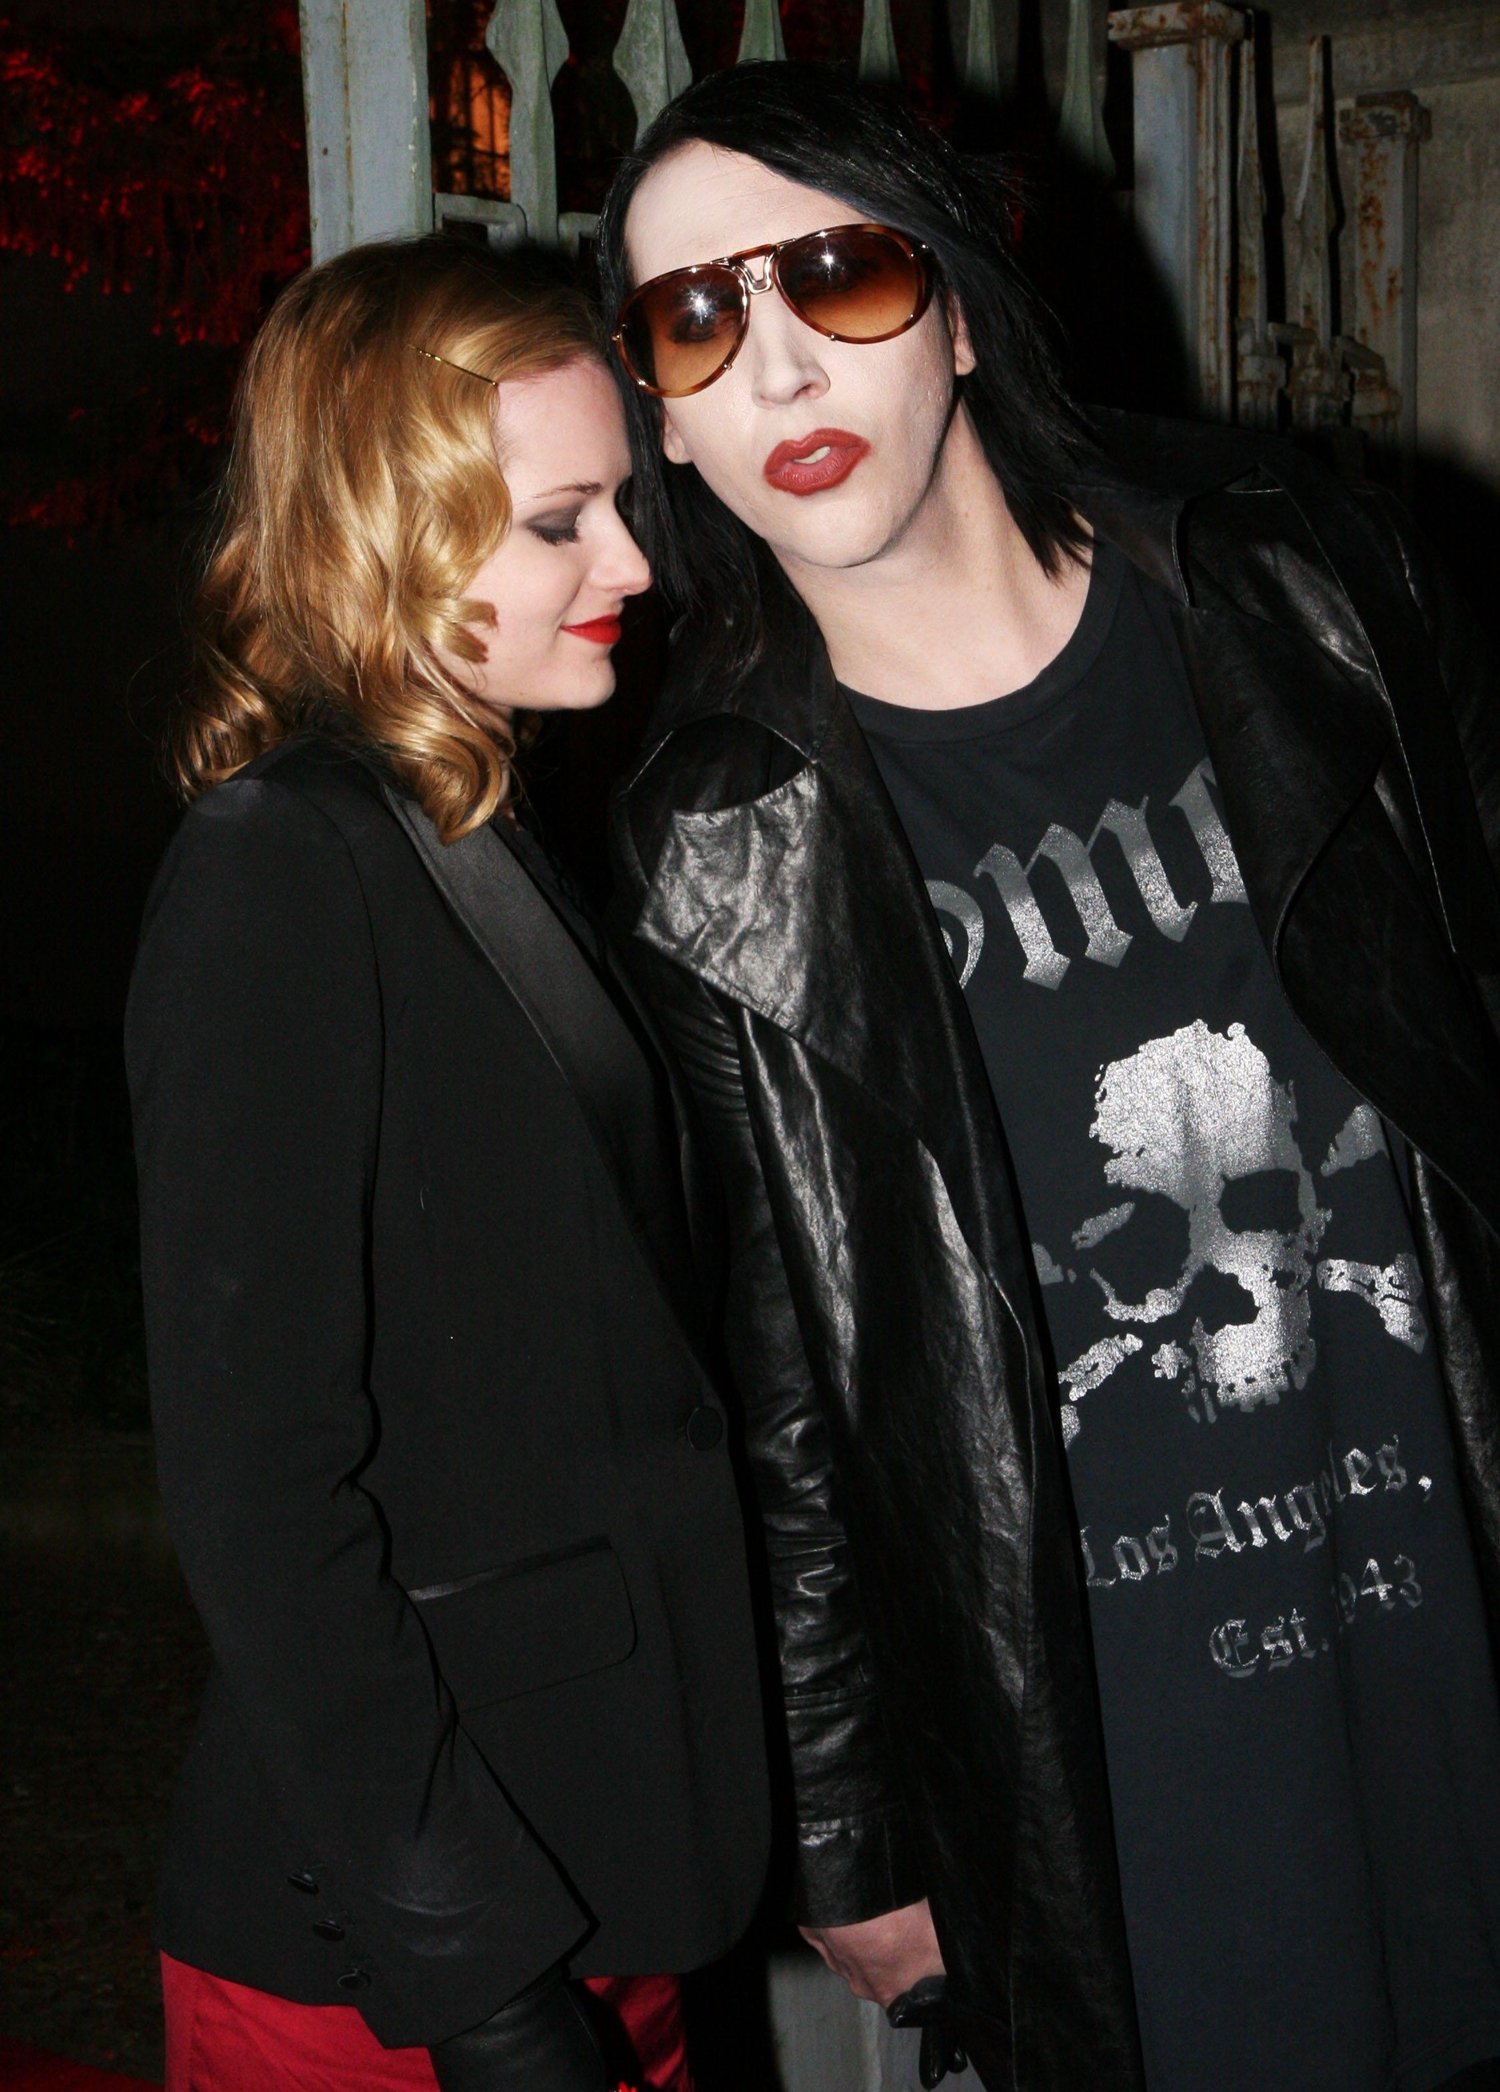 Marilyn Manson and girlfriend Evan Rachel Wood started dating in mid-2006 when she was 18 and he was 37